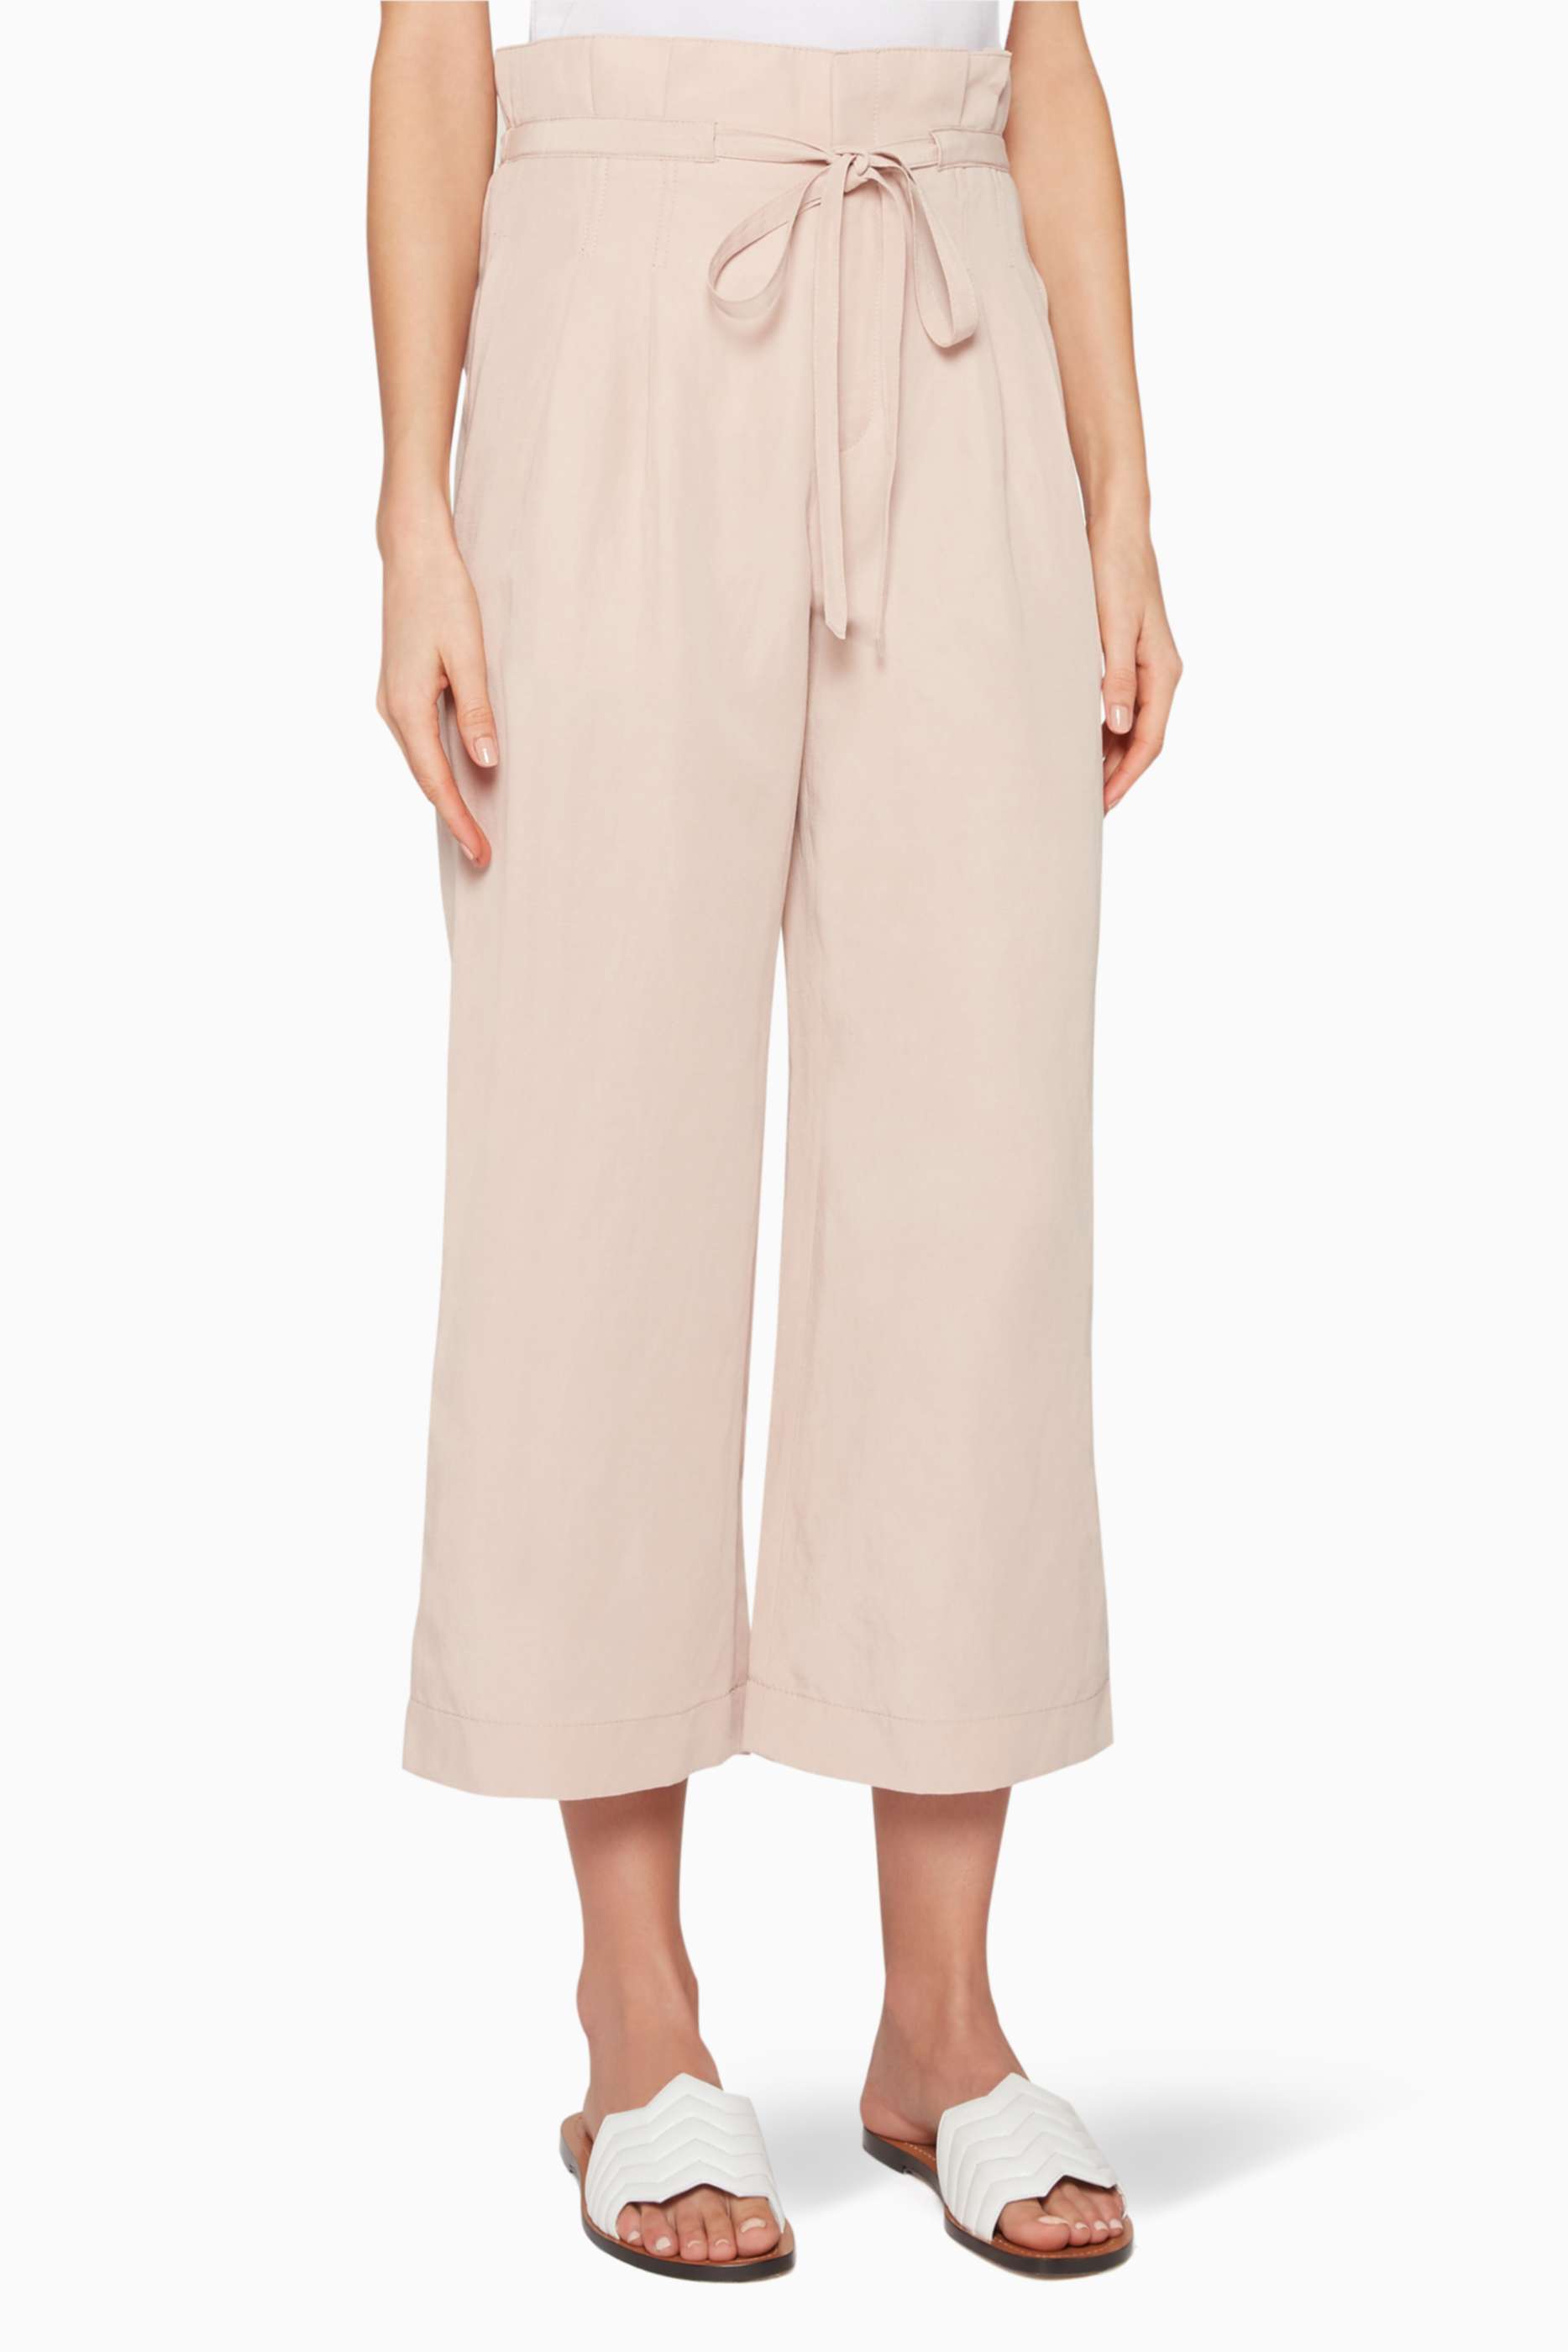 Shop Club Monaco Pink Anreannah Striped Cropped Pants for 